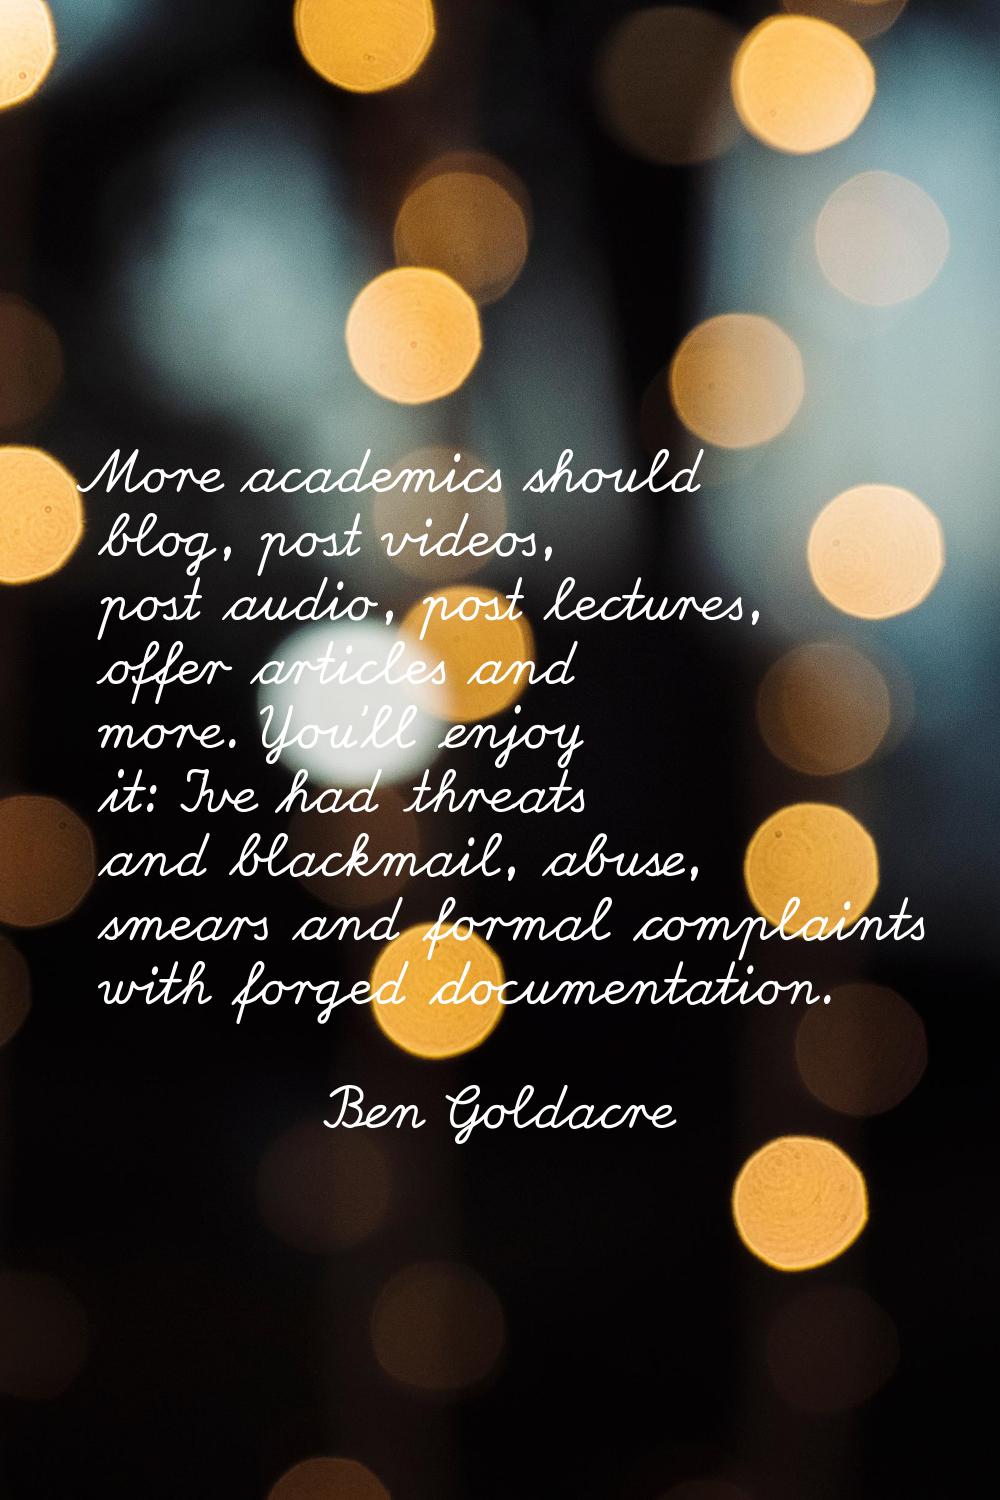 More academics should blog, post videos, post audio, post lectures, offer articles and more. You'll